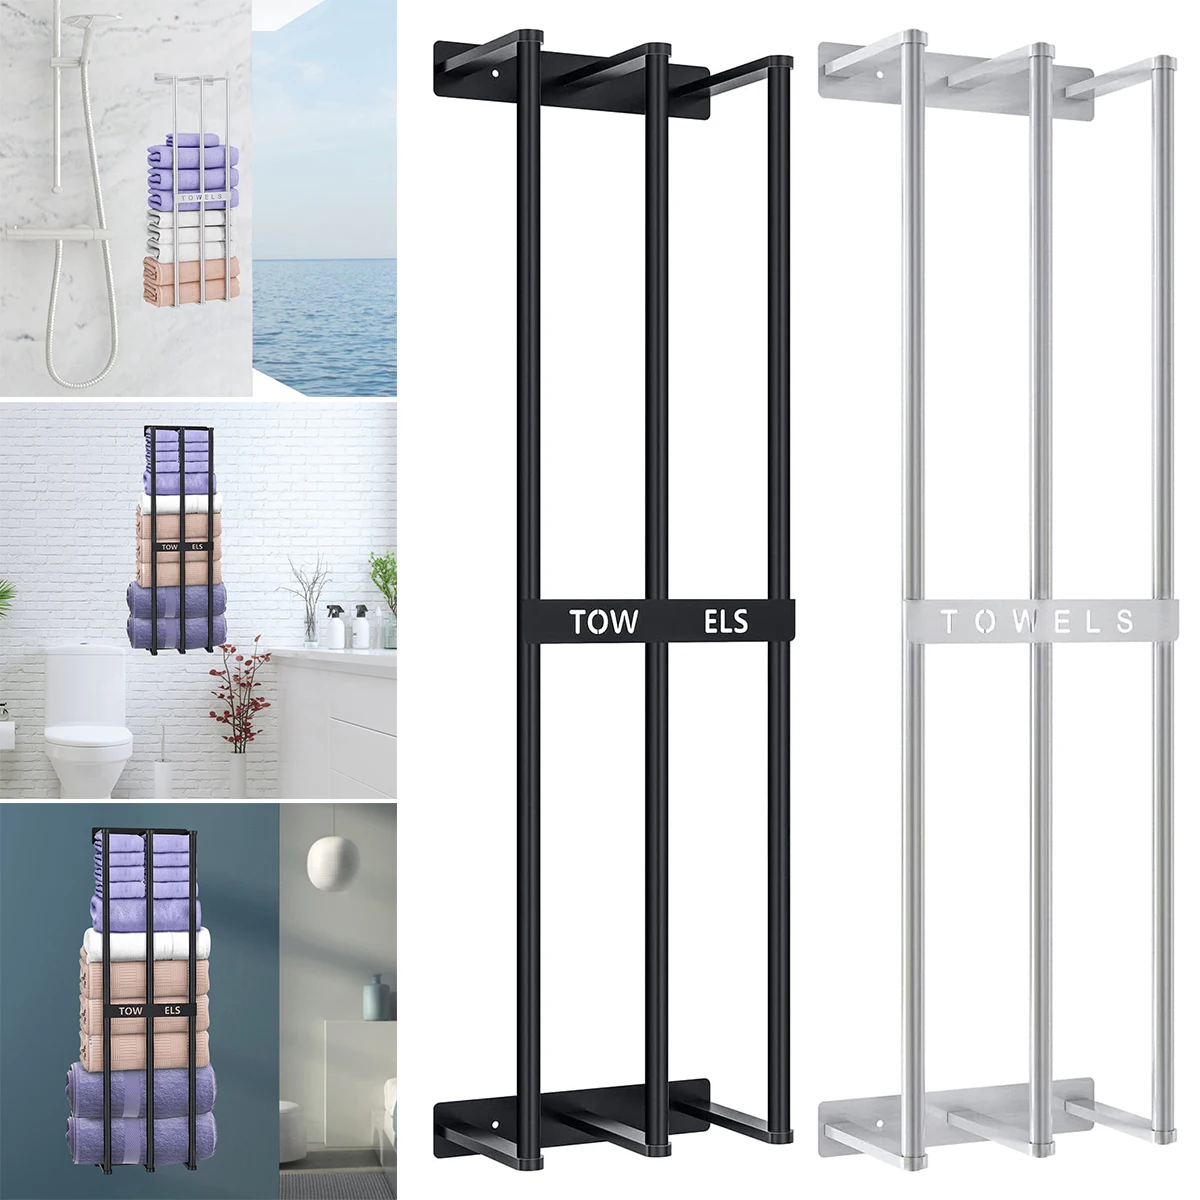 

Wall Towel Rack Stainless Steel Bath Tower Holder Wall Mounted Tower Storage Organizer Durable Rolled Tower Rack Holder Metal